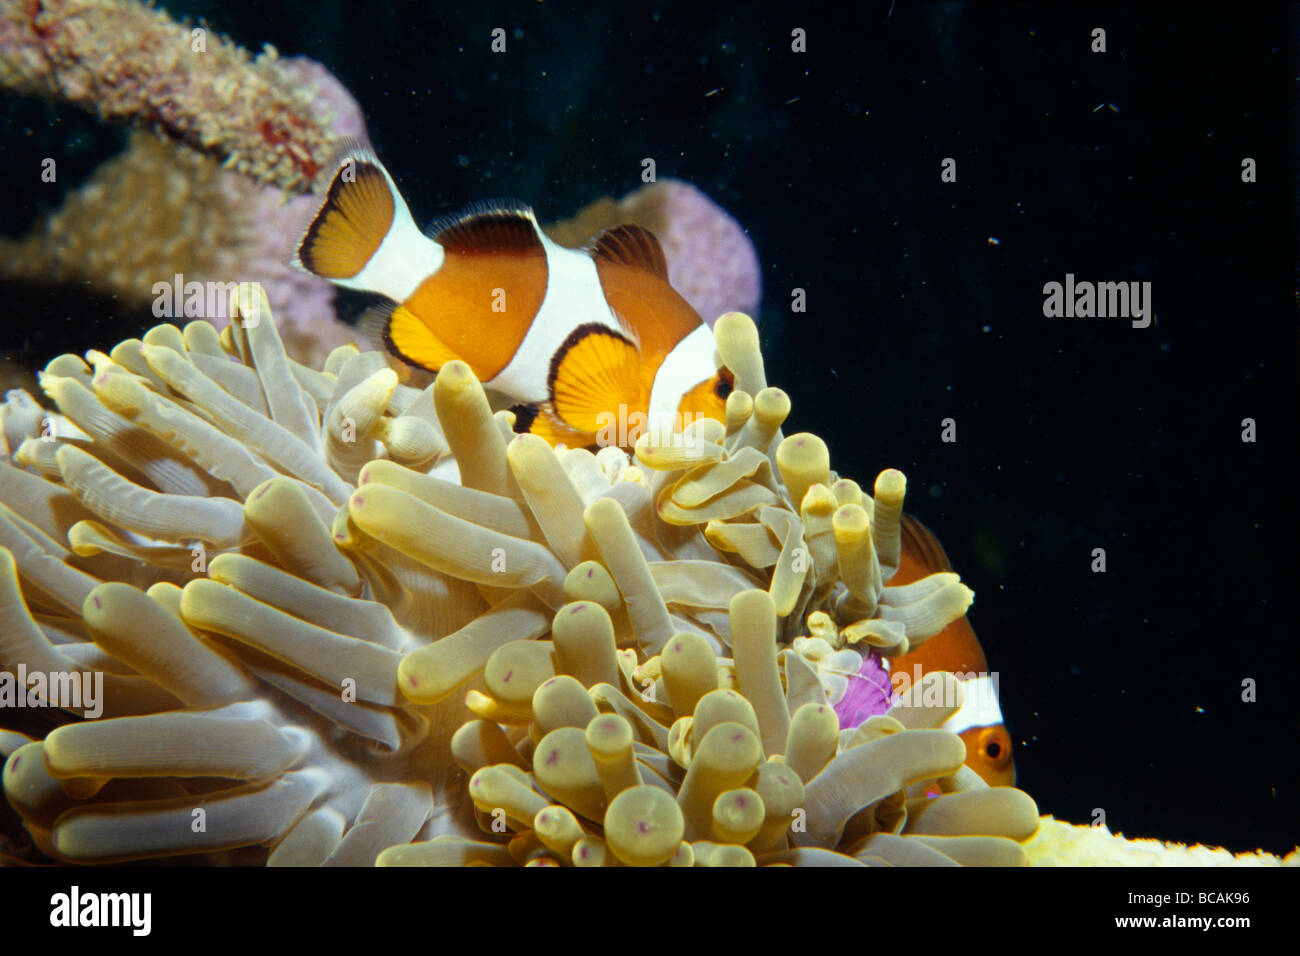 A brightly orange patterned Clownfish defending a Sea Anemone. Stock Photo